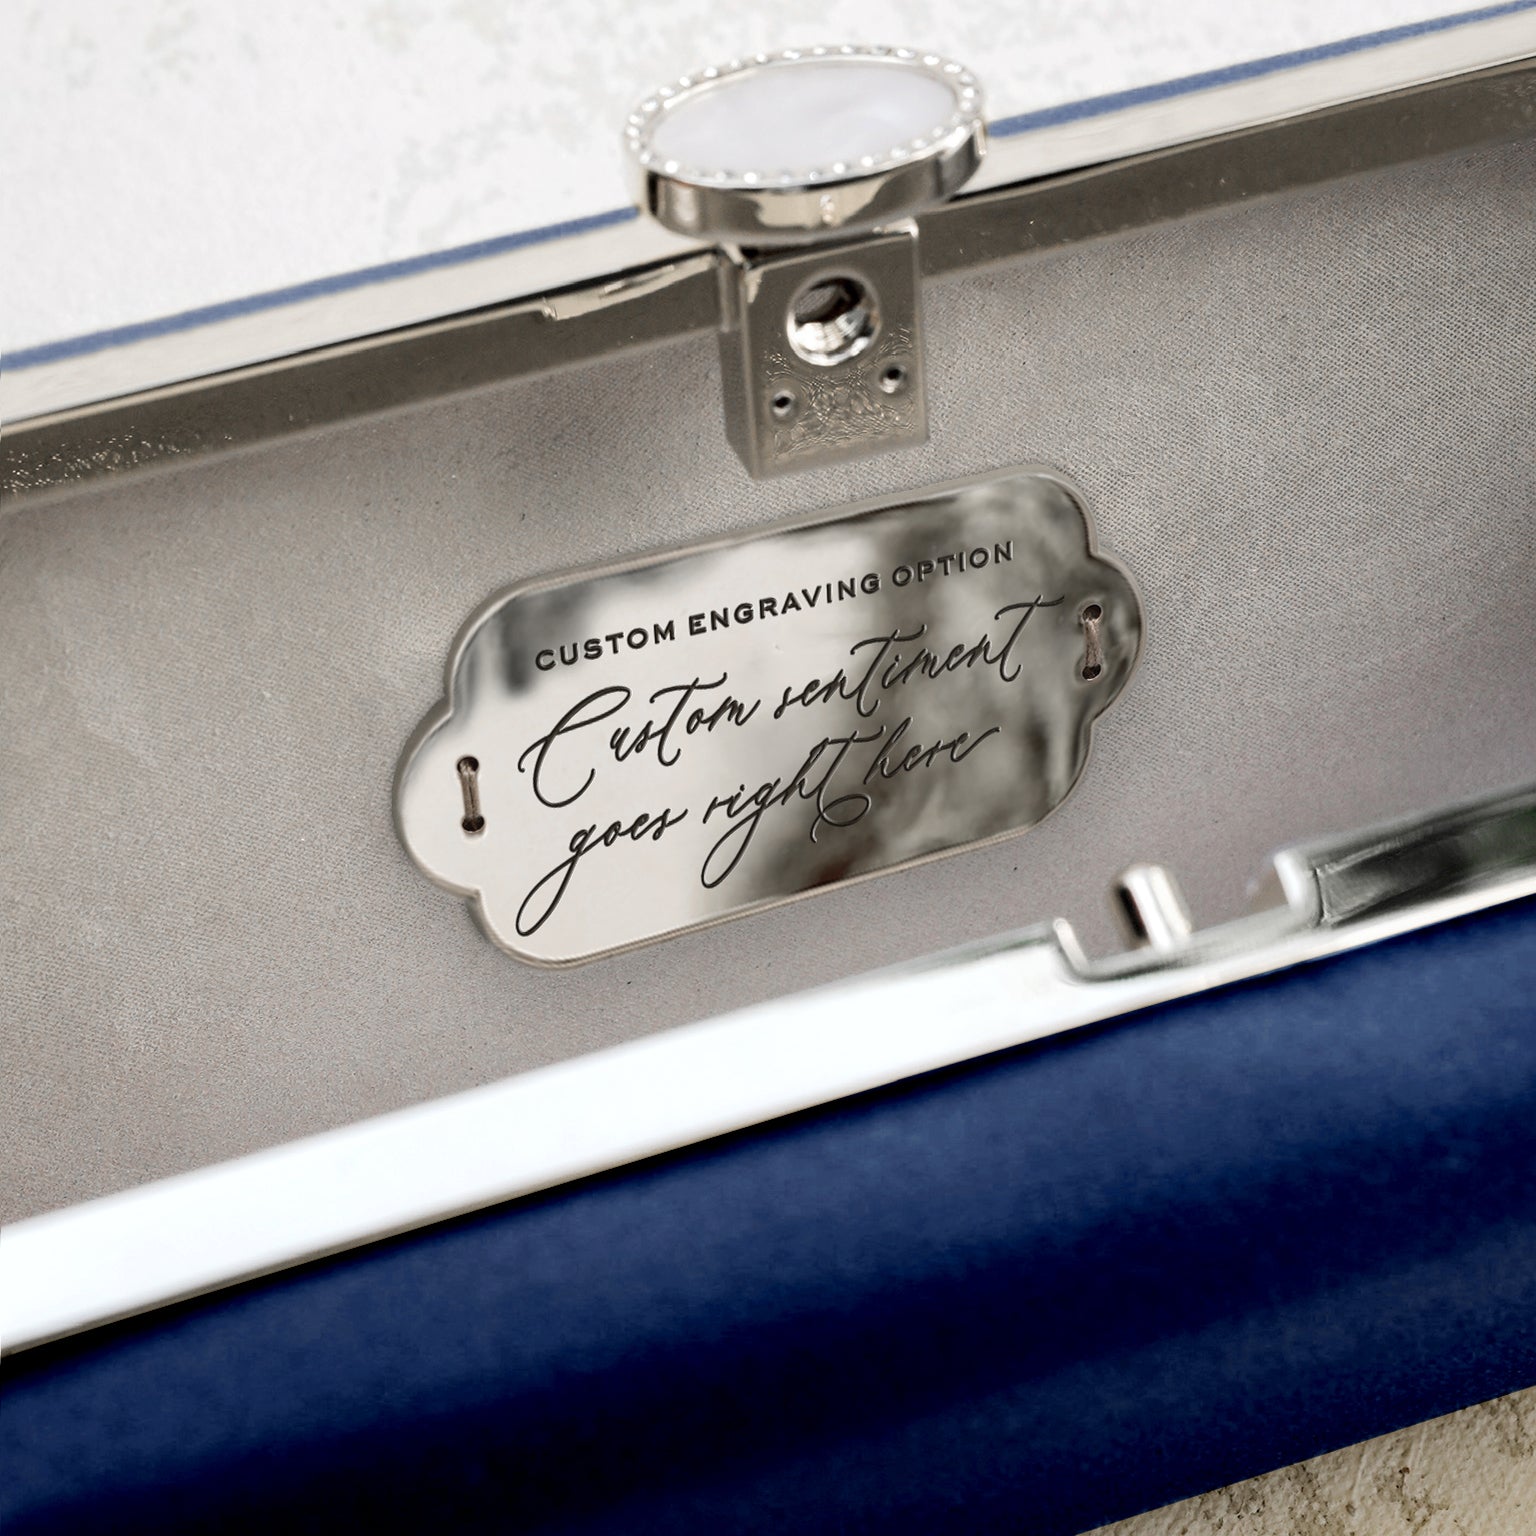 A briefcase interior showing a custom engraving plate with promotional text for the Navy Blue Petite Bella Clutch evening clutch from The Bella Rosa Collection.